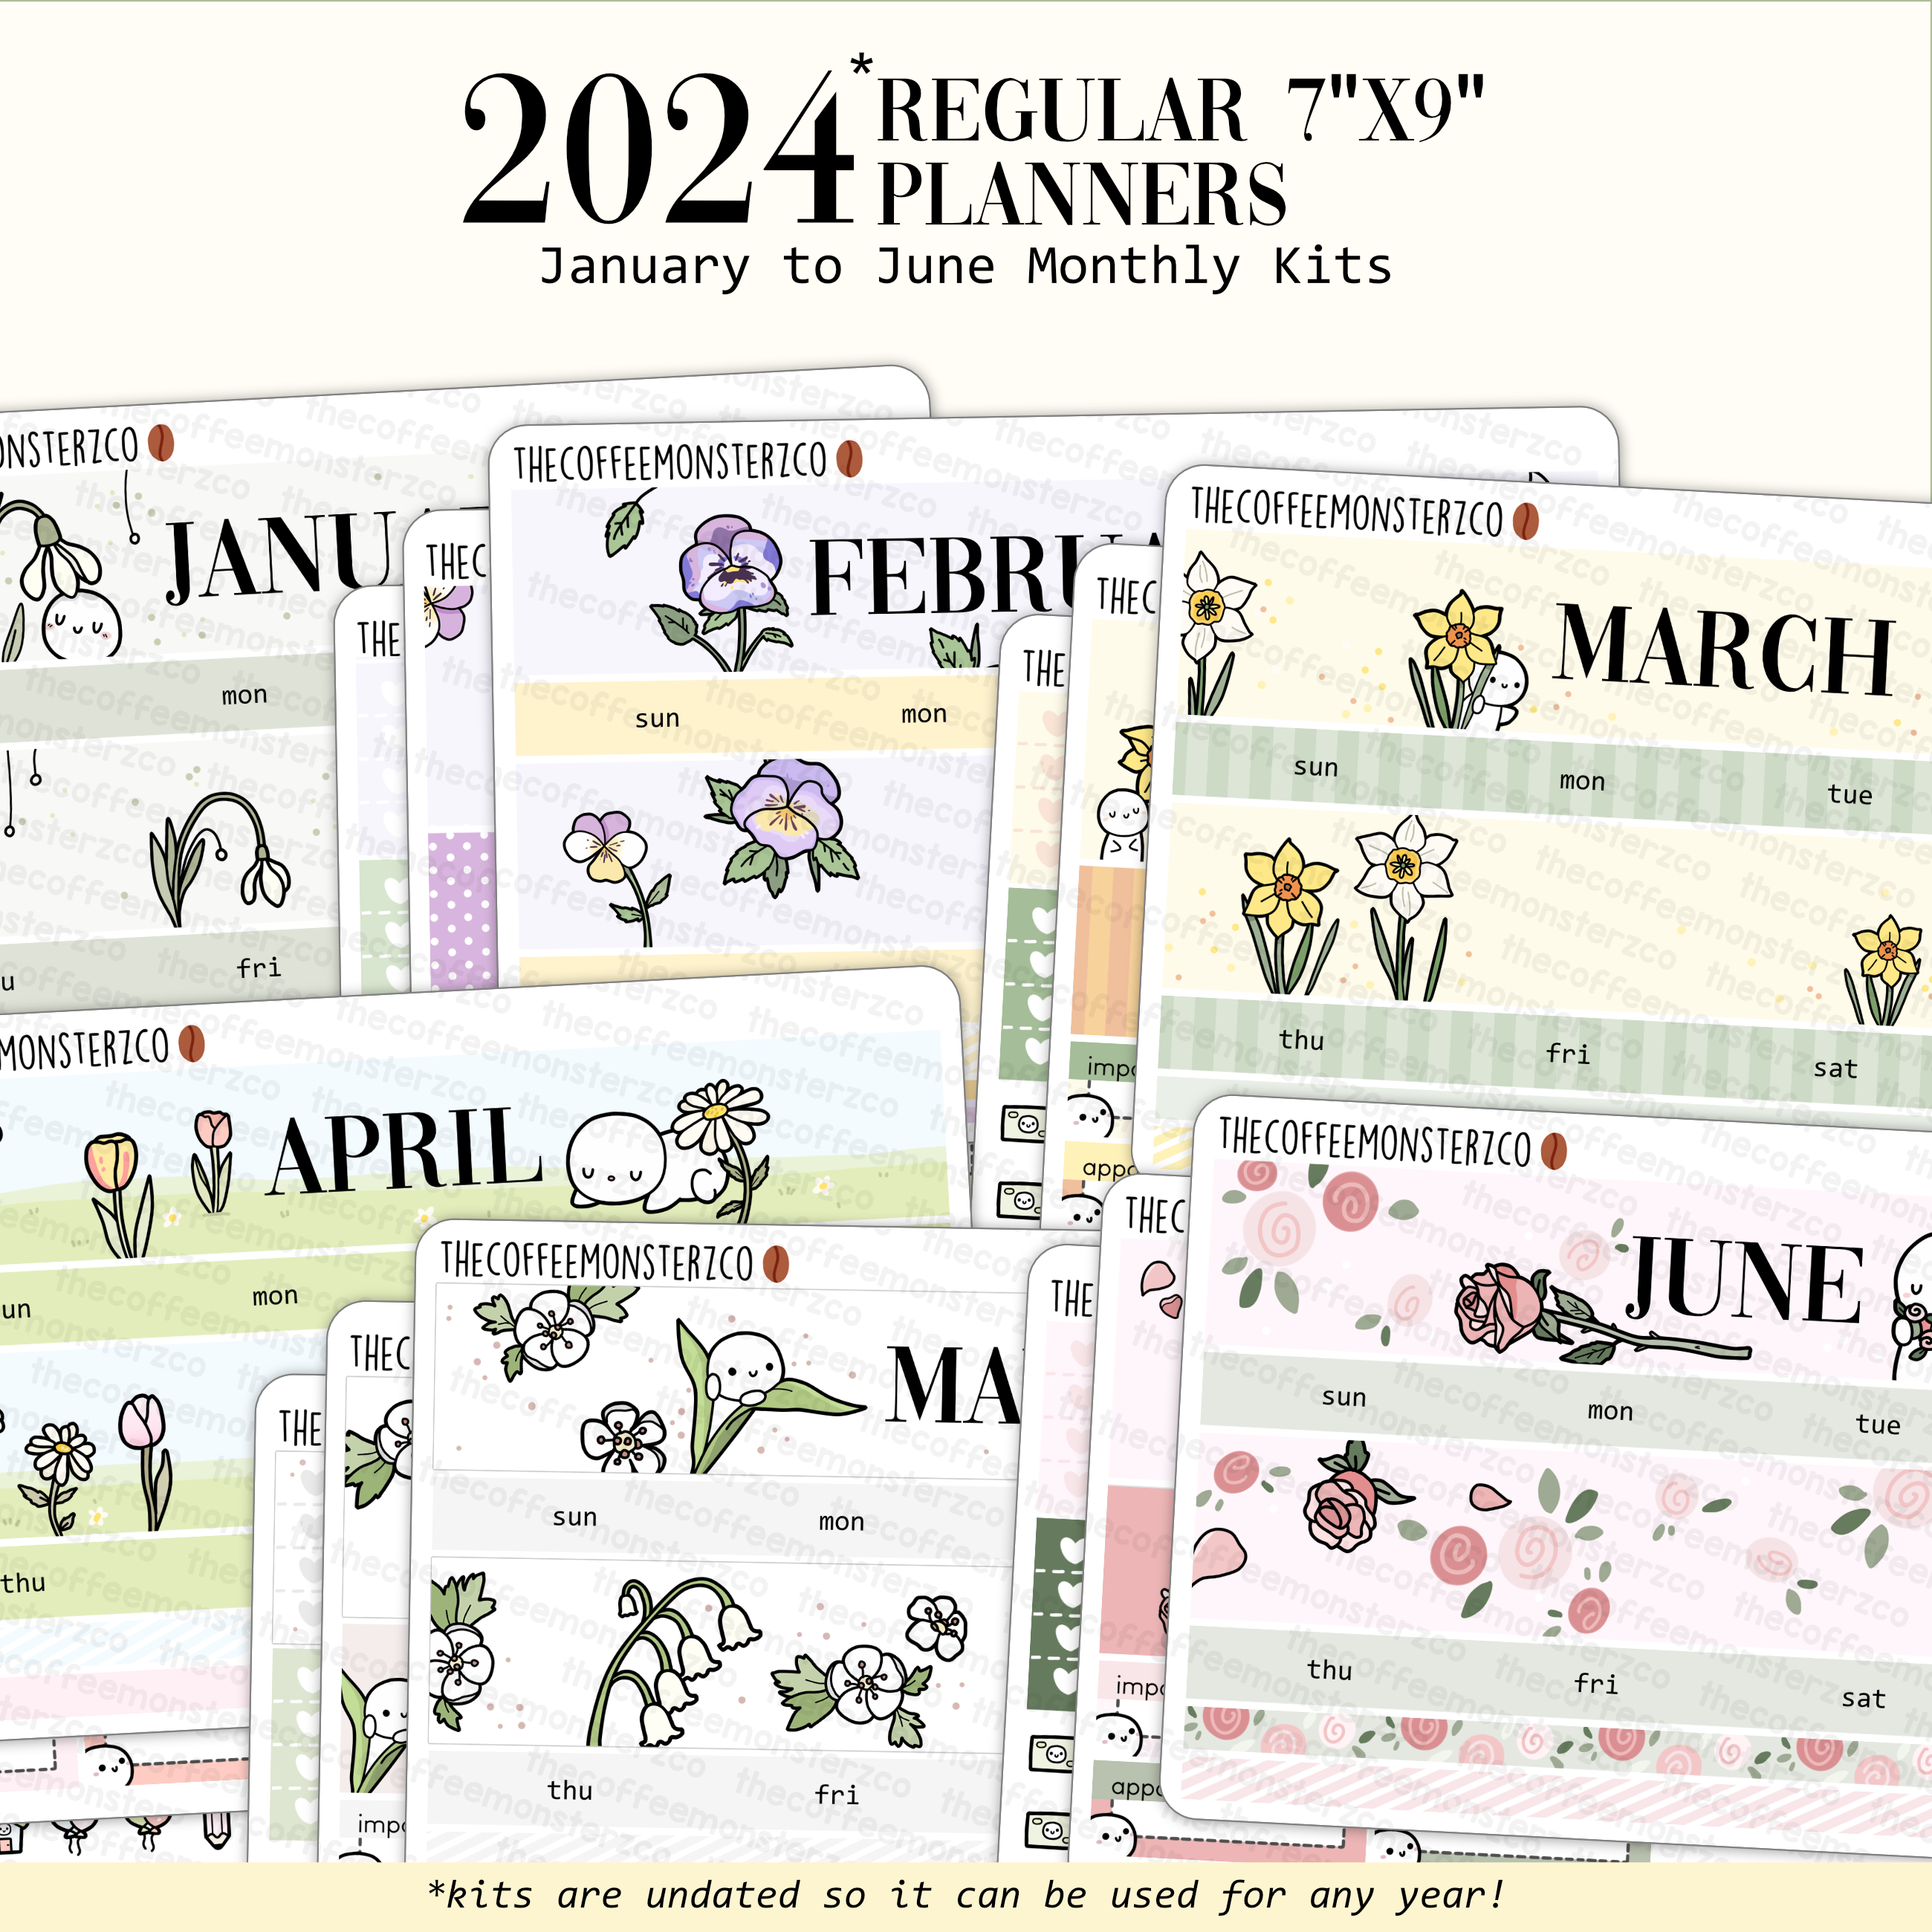 2023 Coordinating Add-ons - Bullet Journal - Part 1 – TheCoffeeMonsterzCo